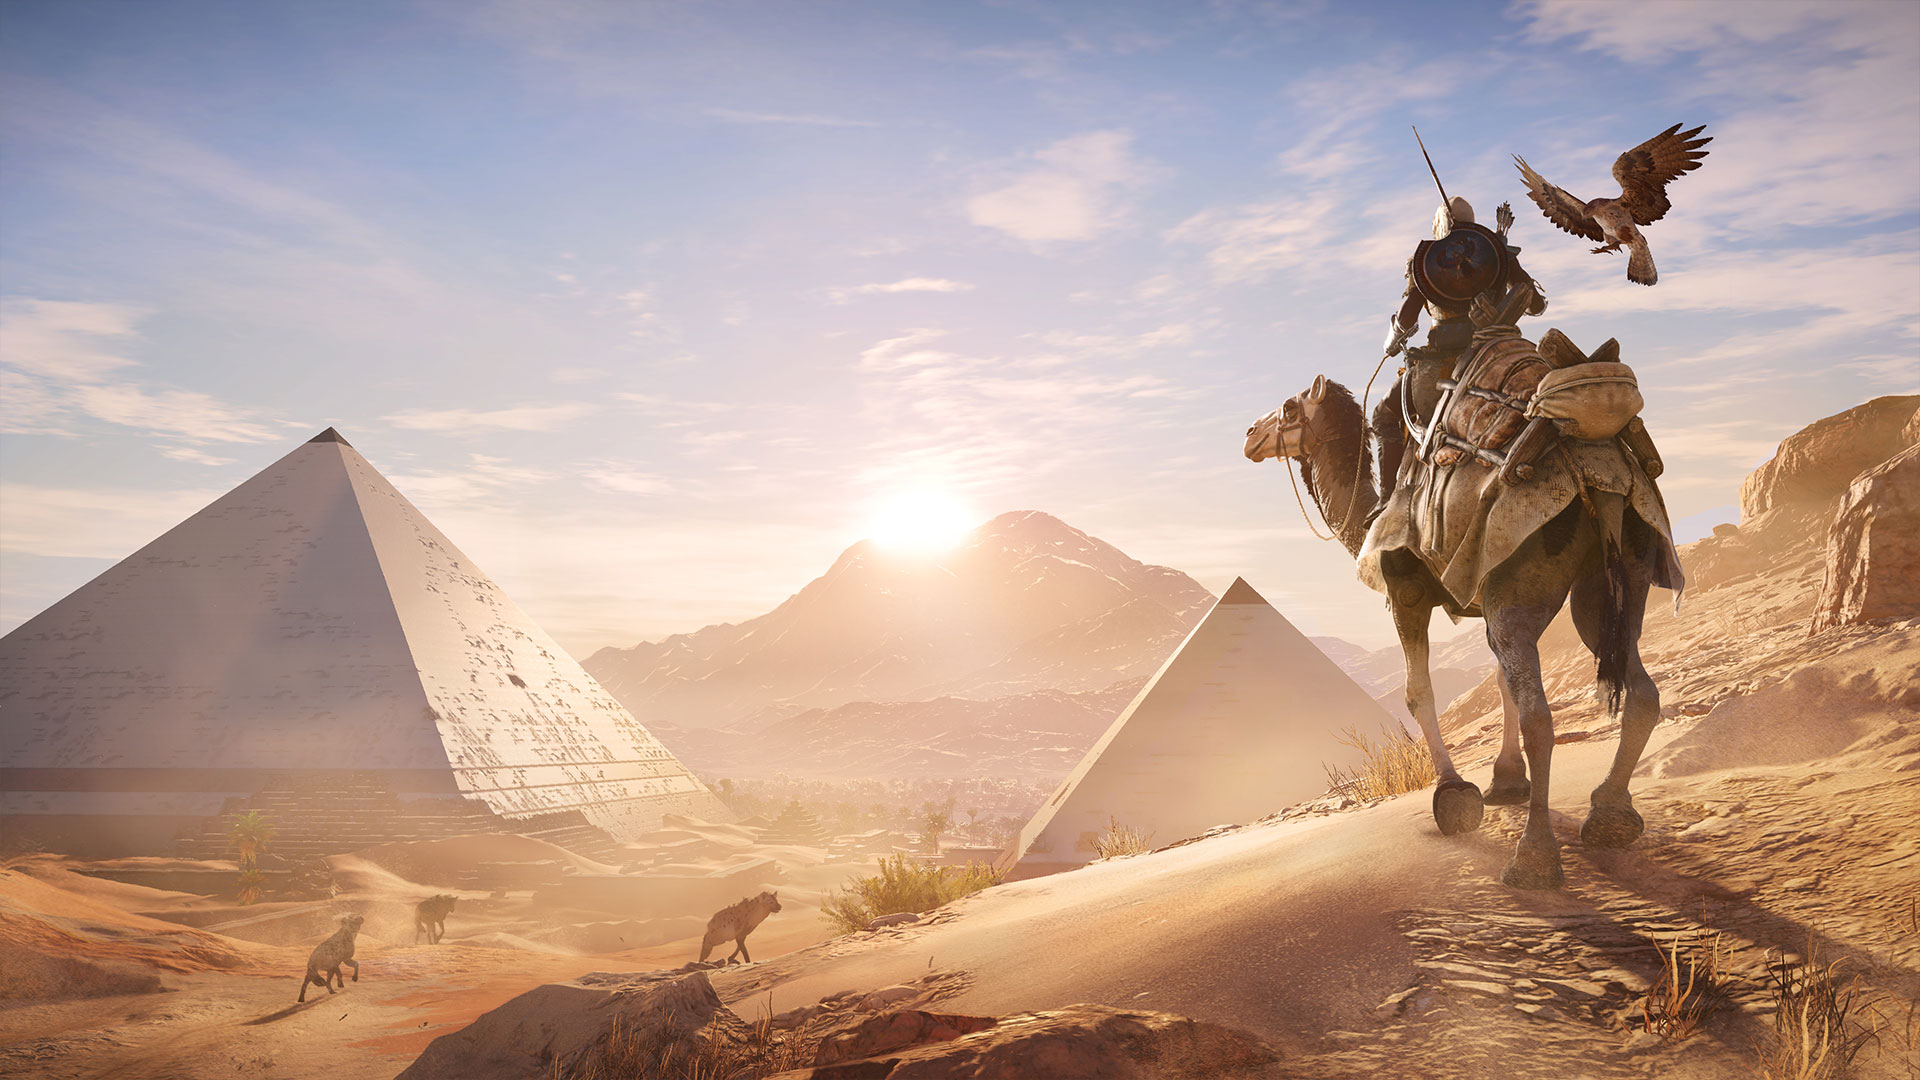 Media asset in full size related to 3dfxzone.it news item entitled as follows: Gameplay trailer in 4K e screenshots in Full HD di Assassin's Creed Origins | Image Name: news26543_Assassin-s-Creed-Origins-Screenshot_2.jpg